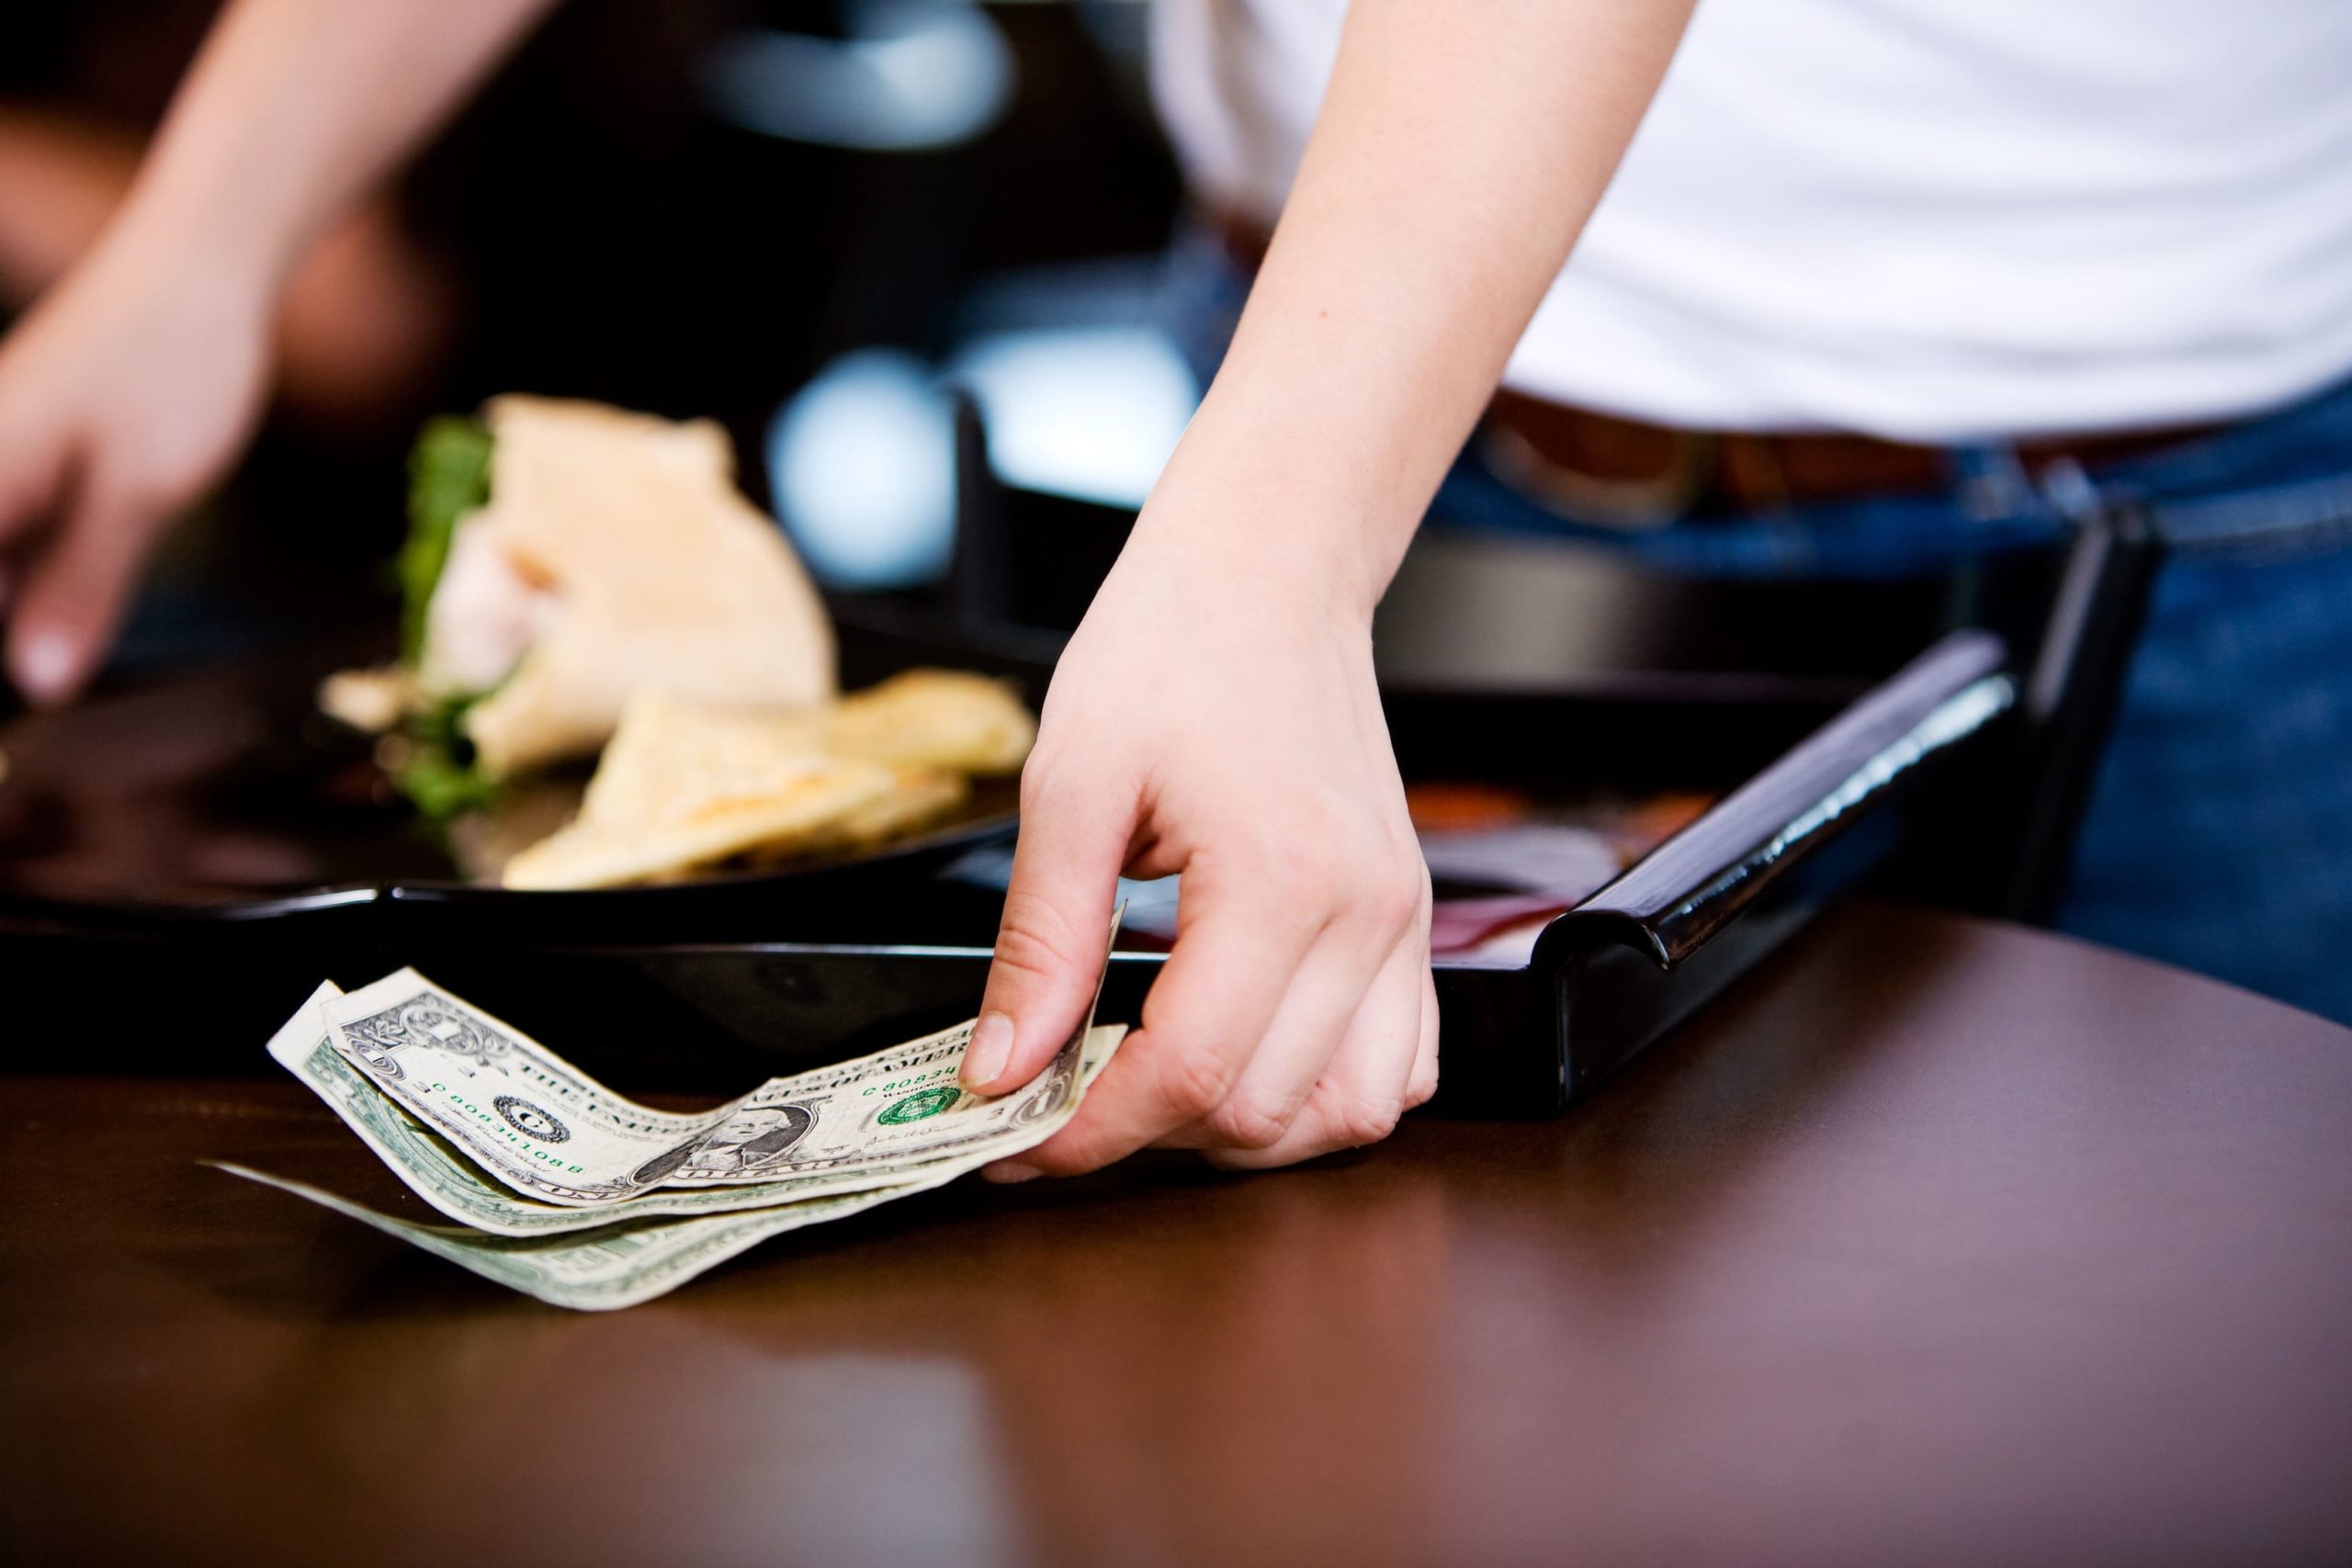 America's Tipping Fatigue: Truth or Myth?